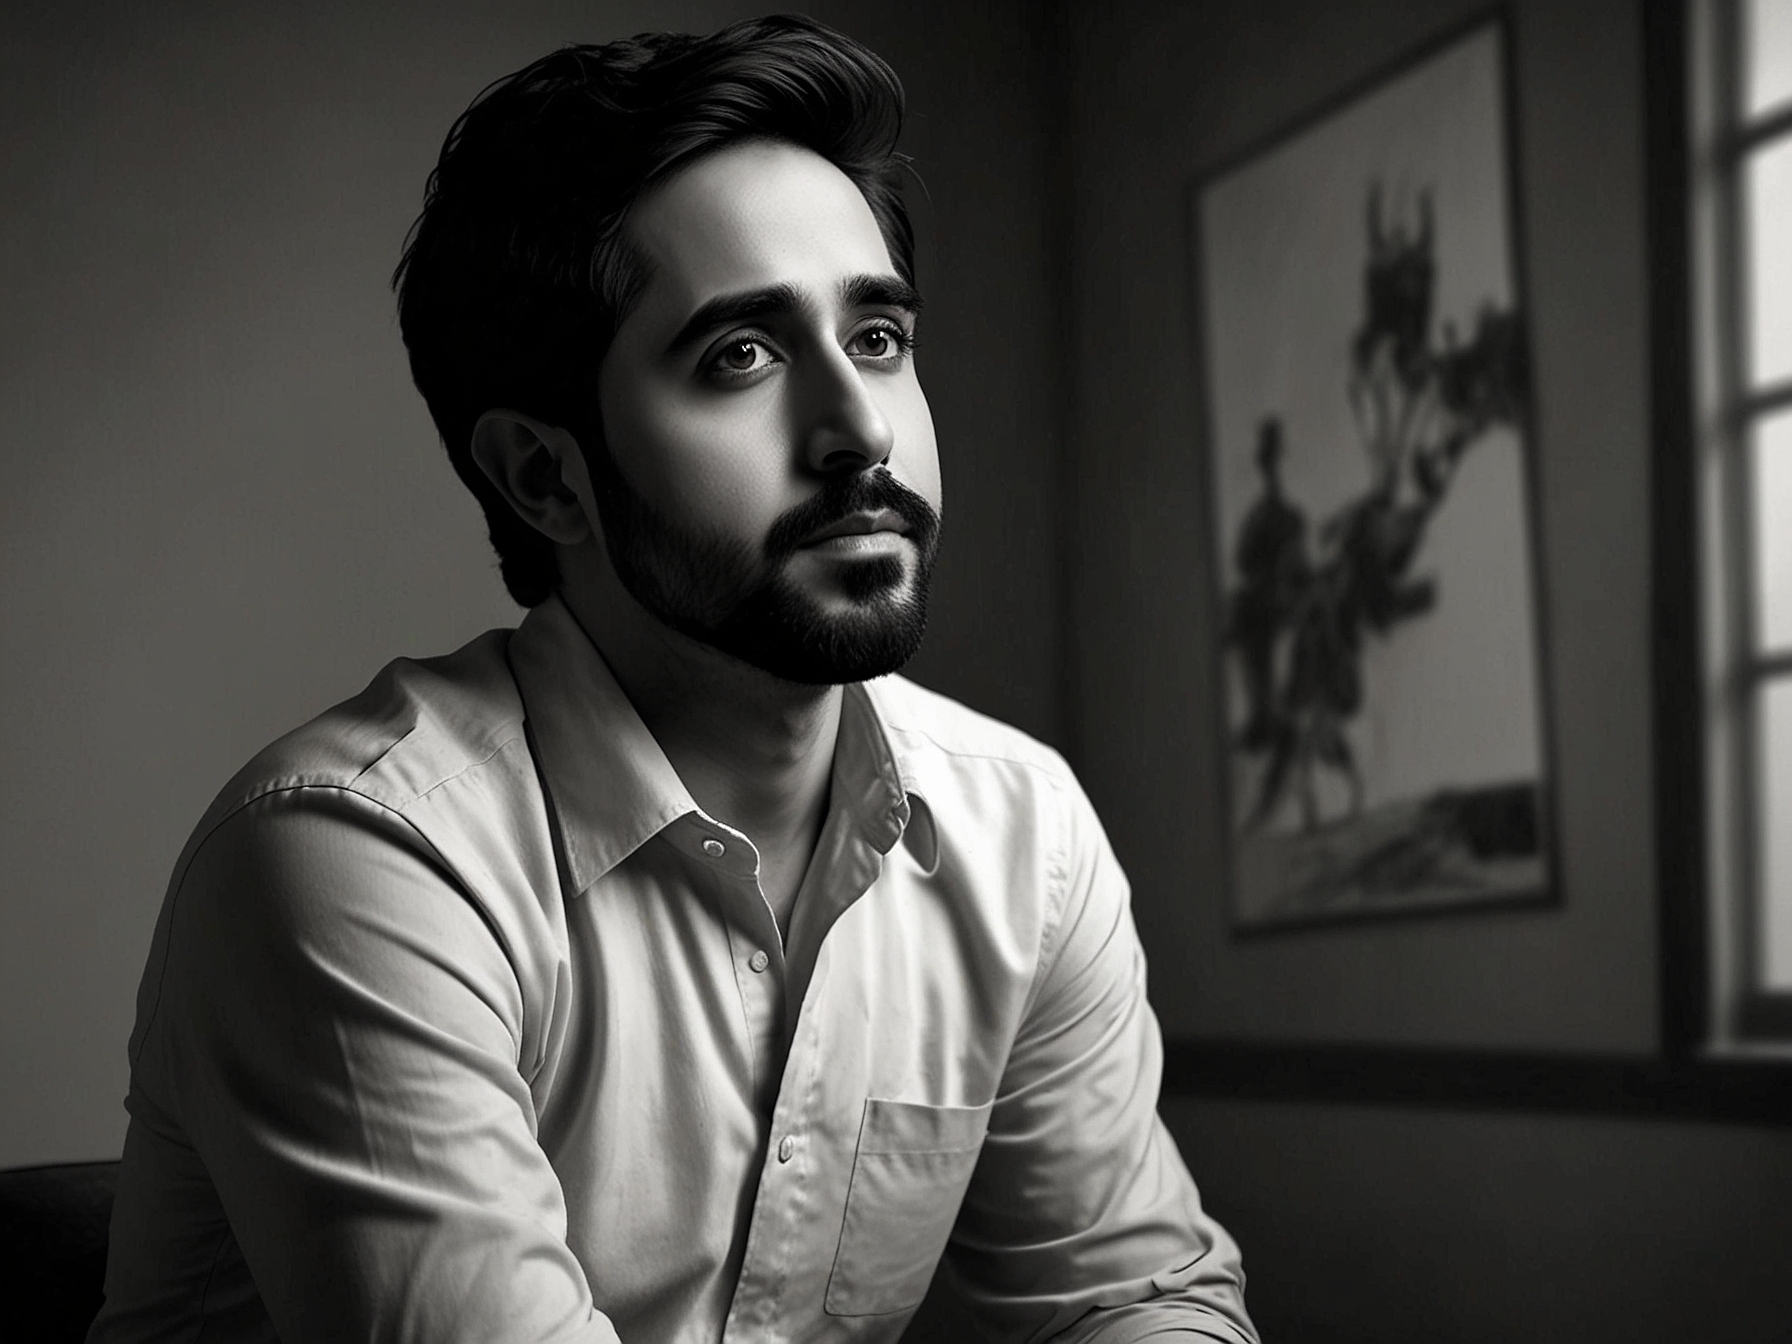 A serene image of Ayushmann Khurrana in a contemplative pose, possibly in a studio setting, reflecting the soulful and introspective nature of his upcoming song 'Reh Ja'.